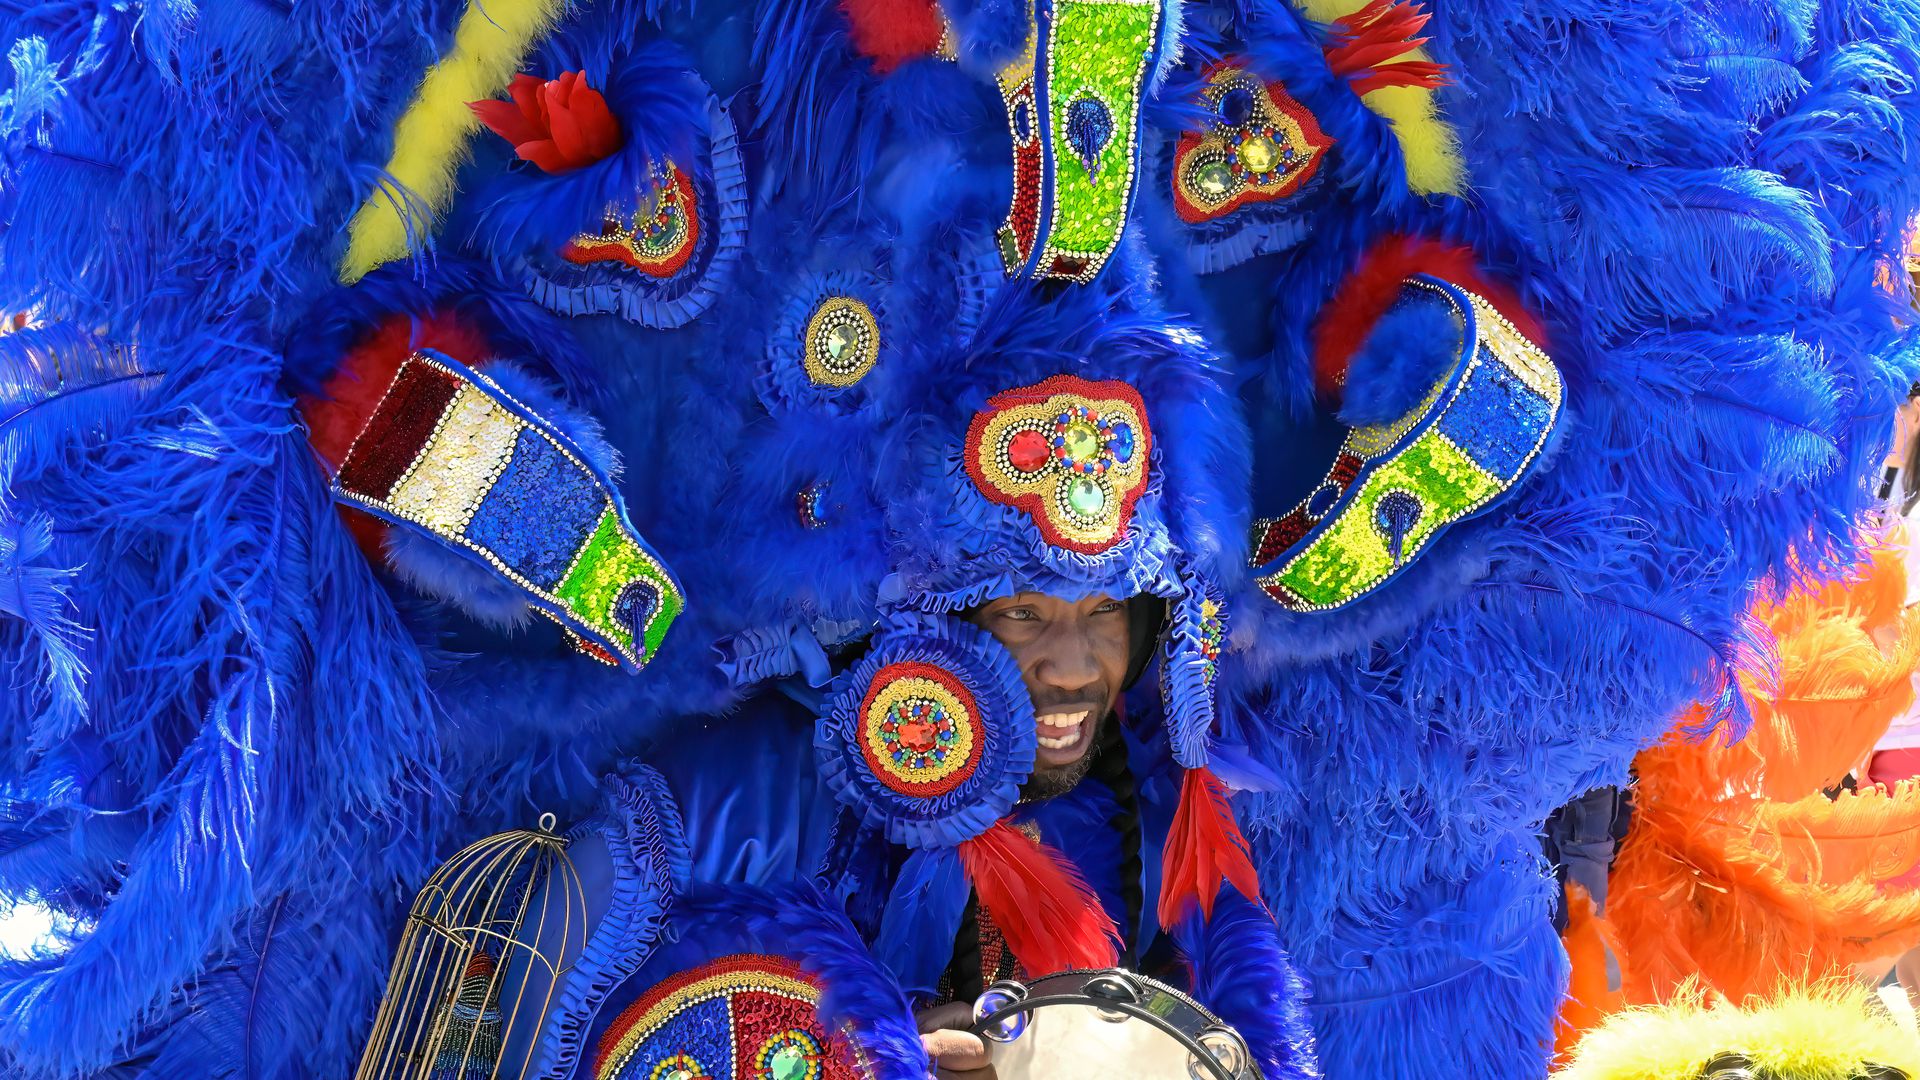 Big Chief Juan Pardo is seen smiling while performing music and wearing his Mardi Gras Indian suit. A beaded headdress of blue feathers surrounds his face.